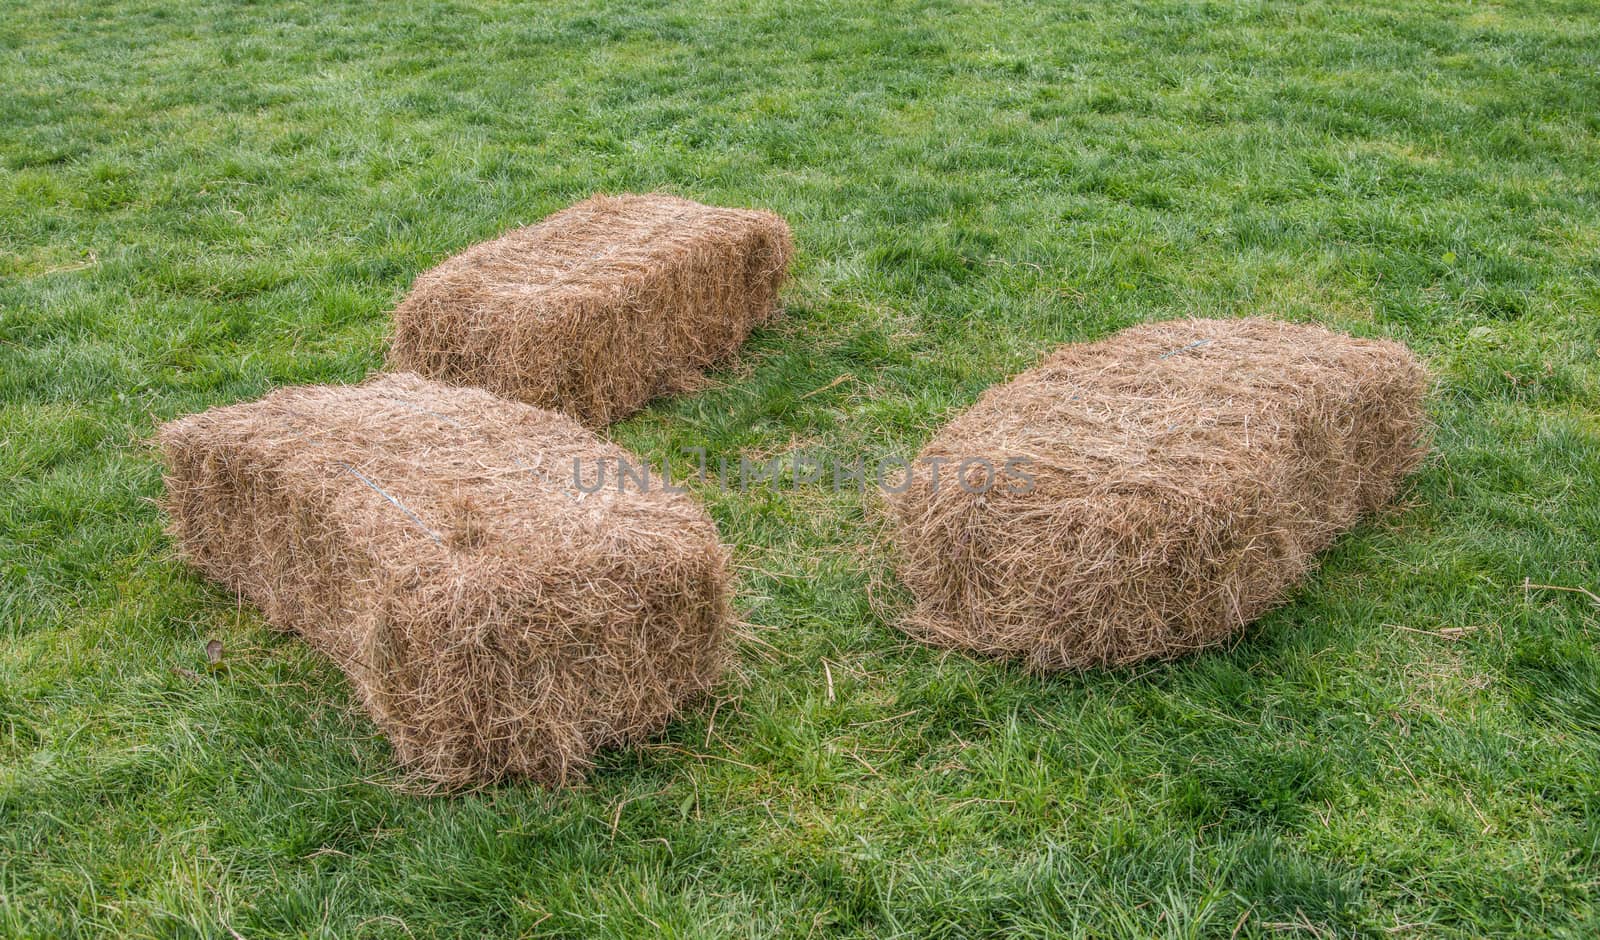 The square hay bales on grass